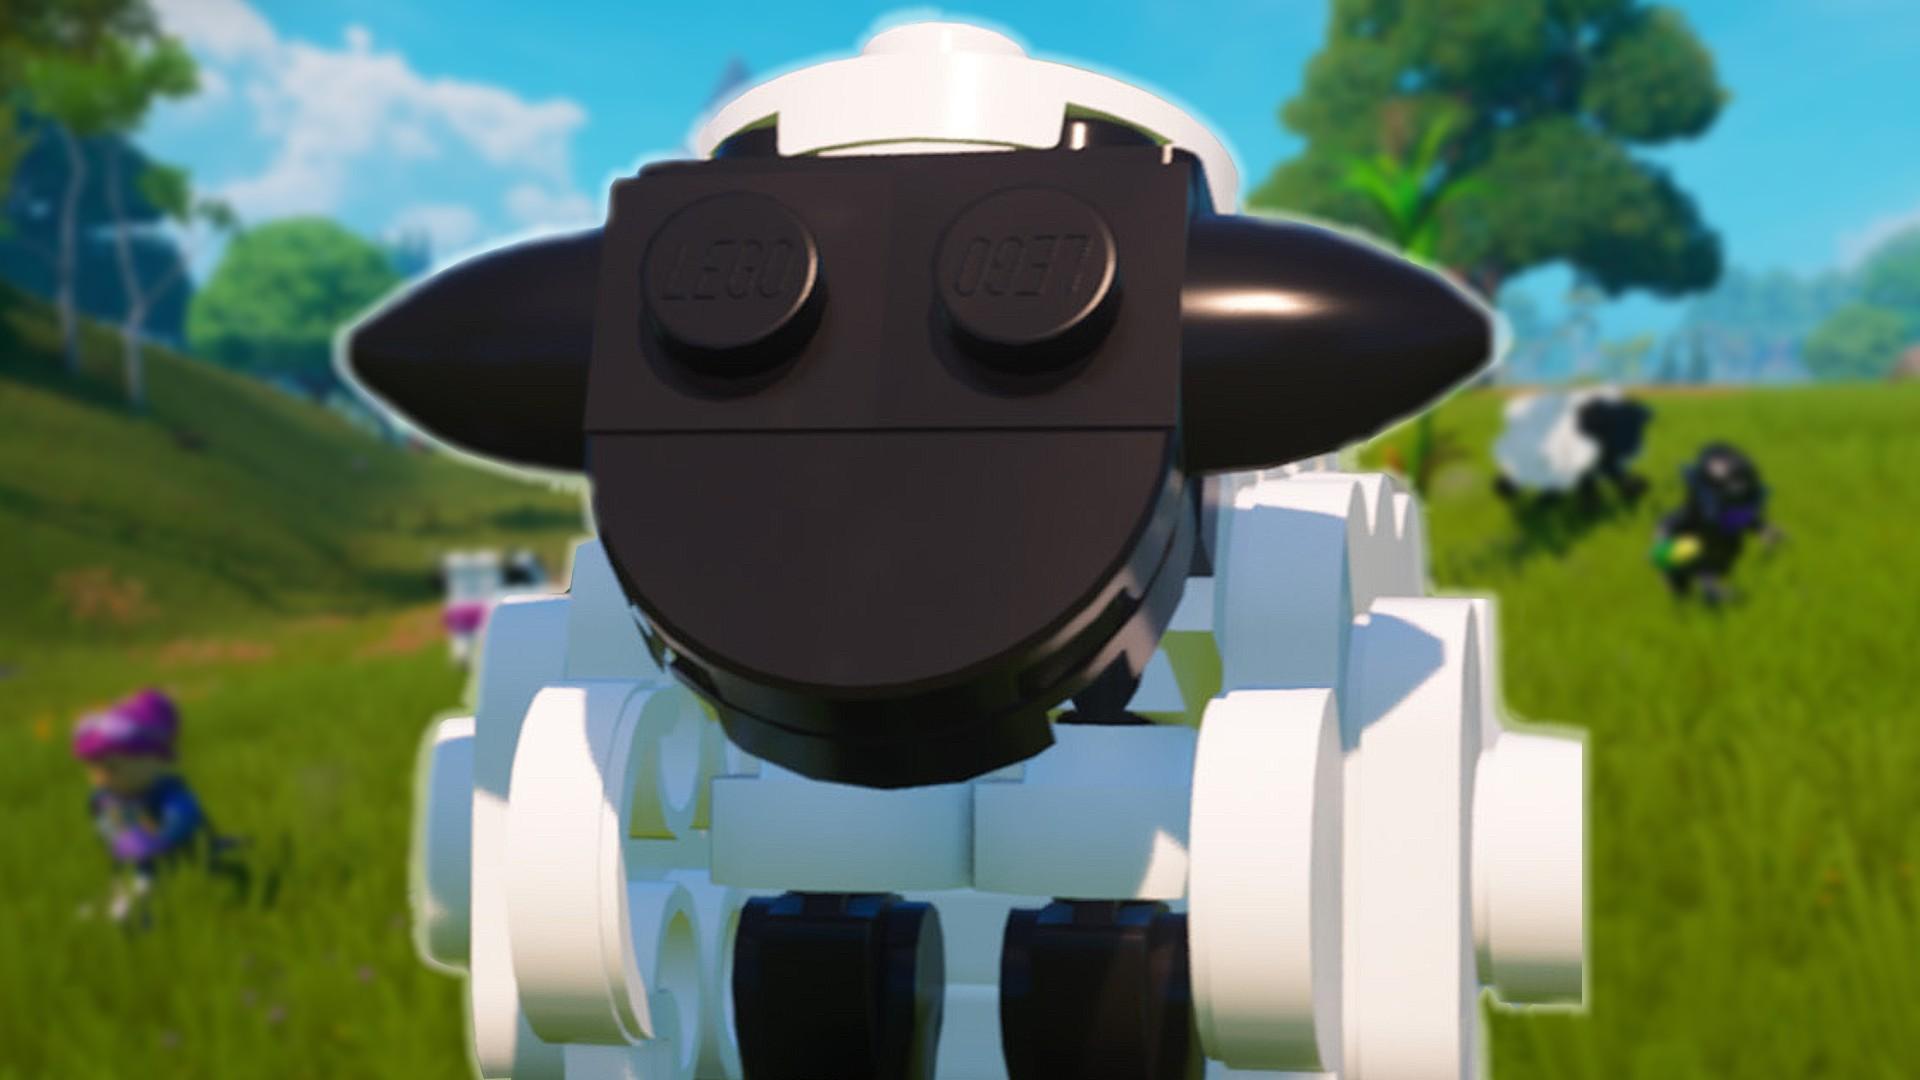 How to Obtain Milk in LEGO Fortnite: A Quick Guide